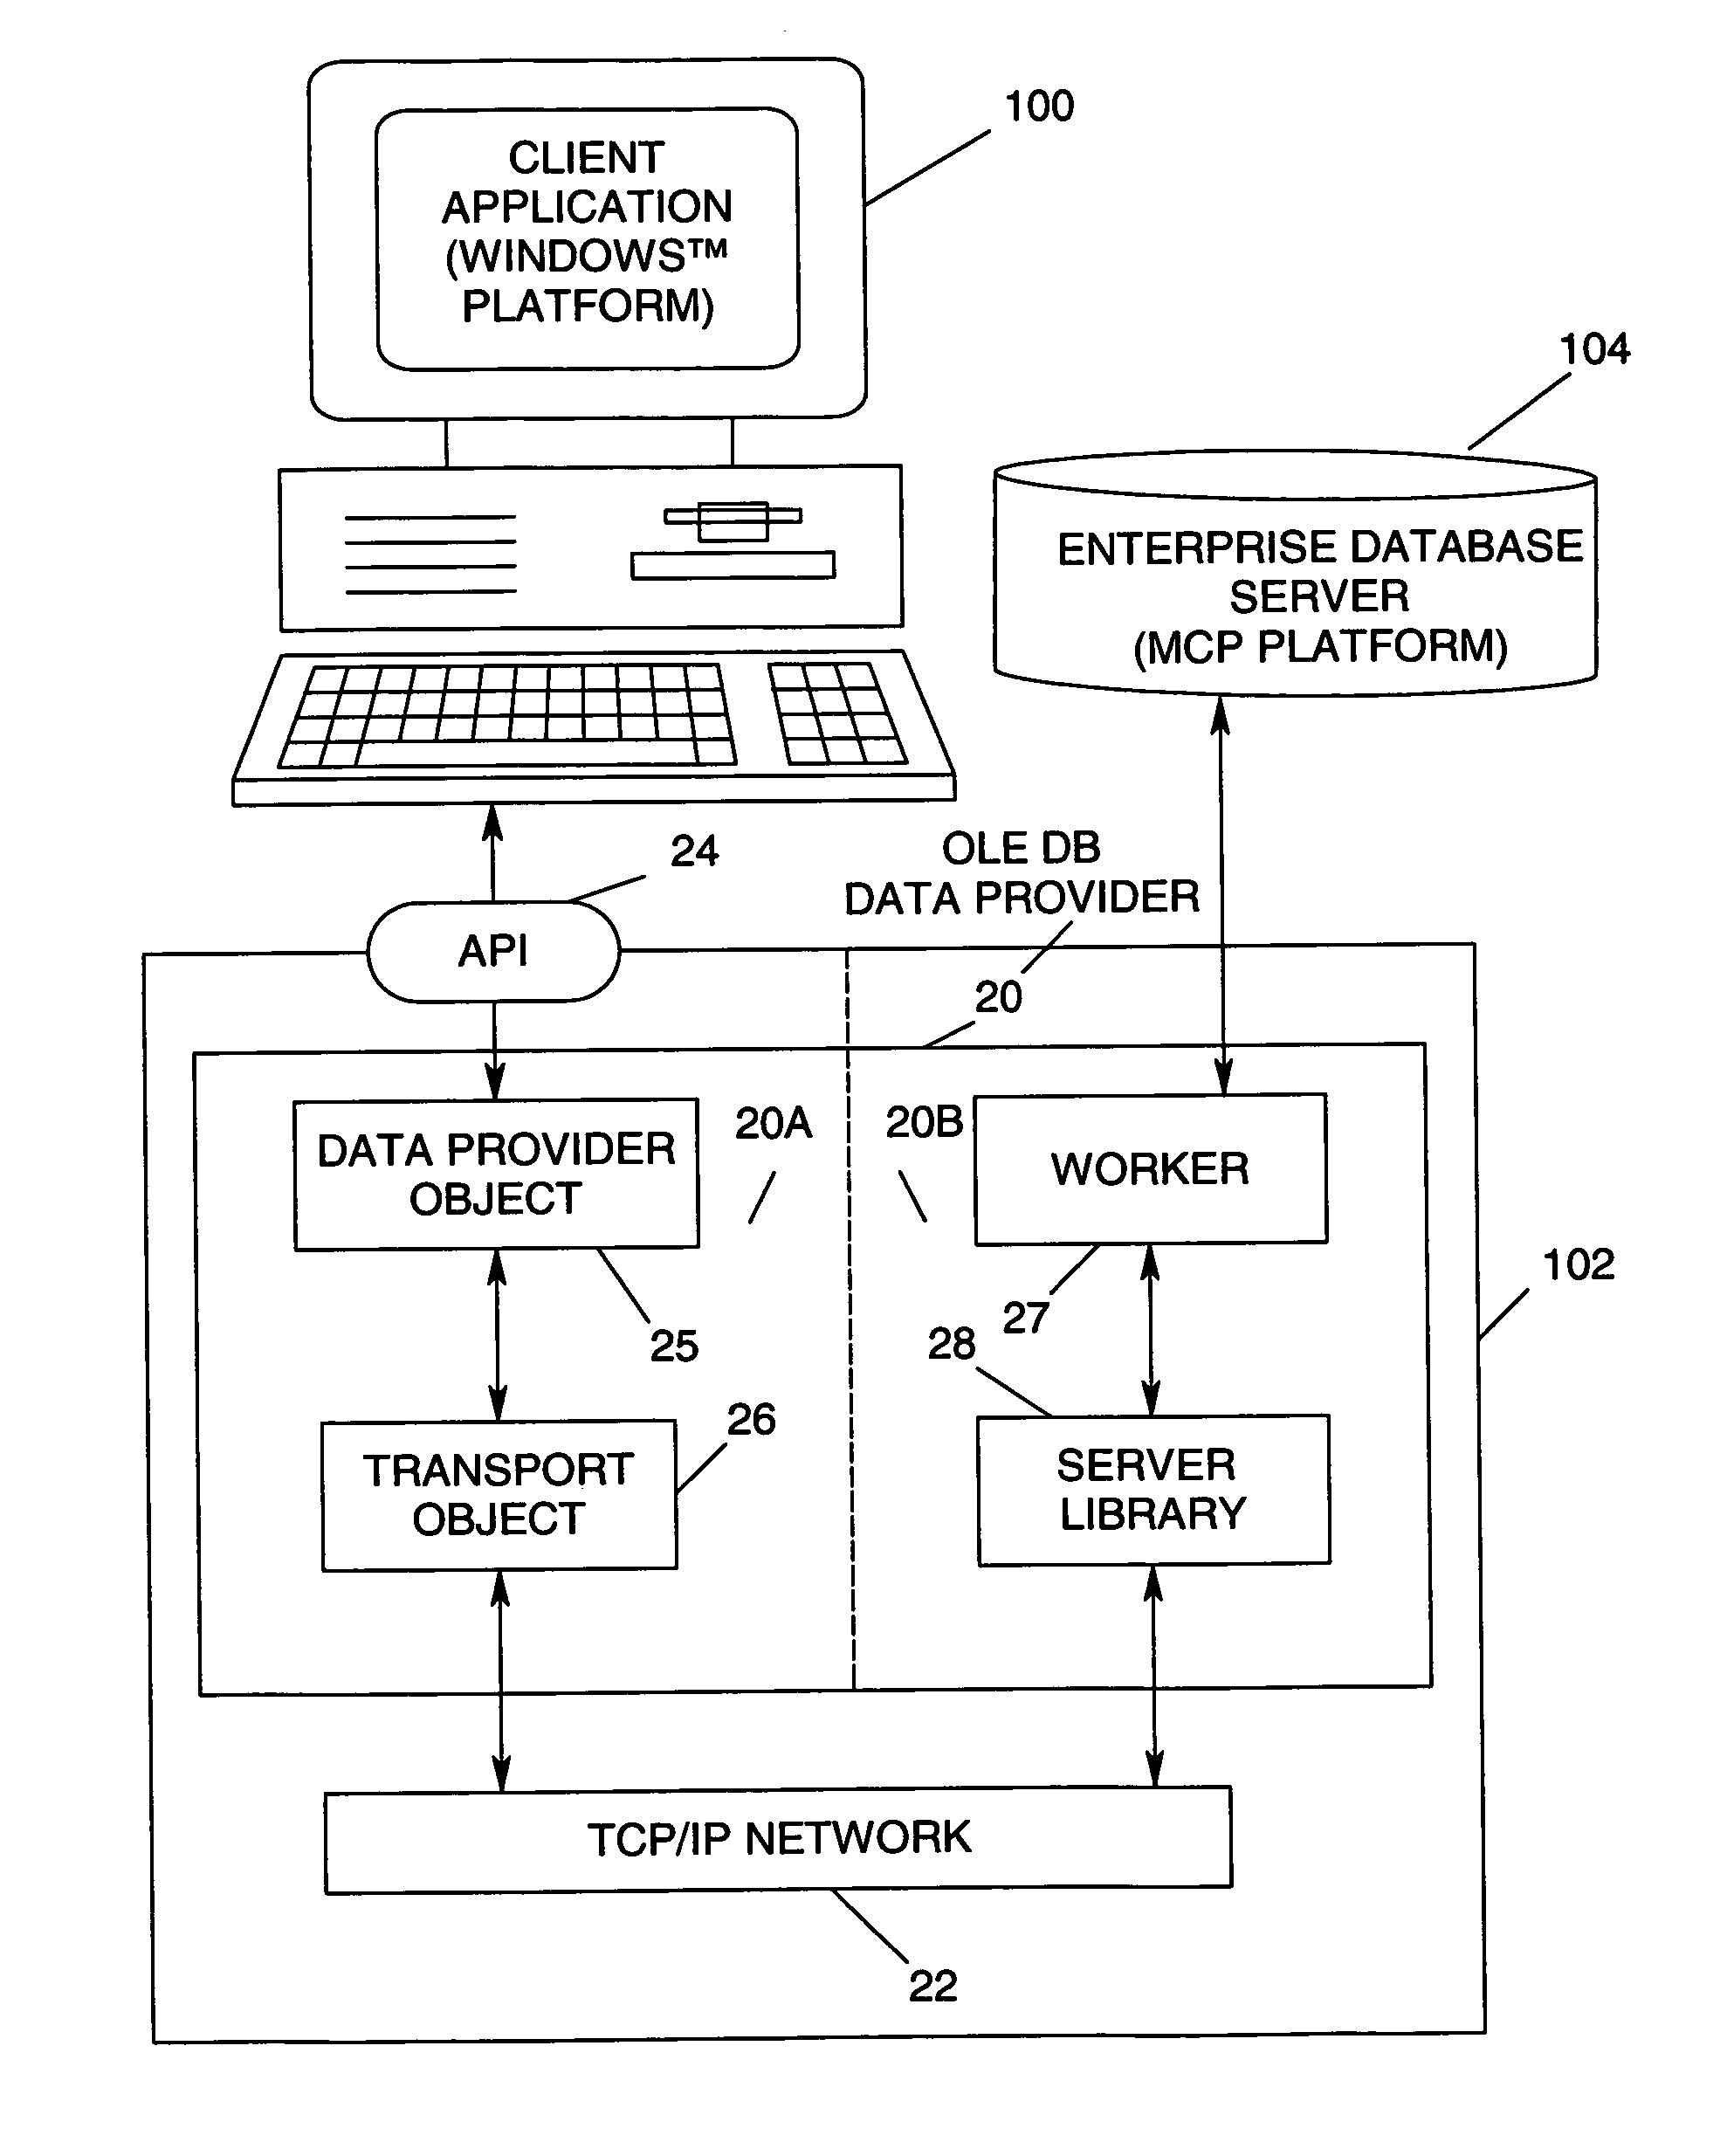 Method for exposing hierarchical table structures and relationships to OLE DB applications